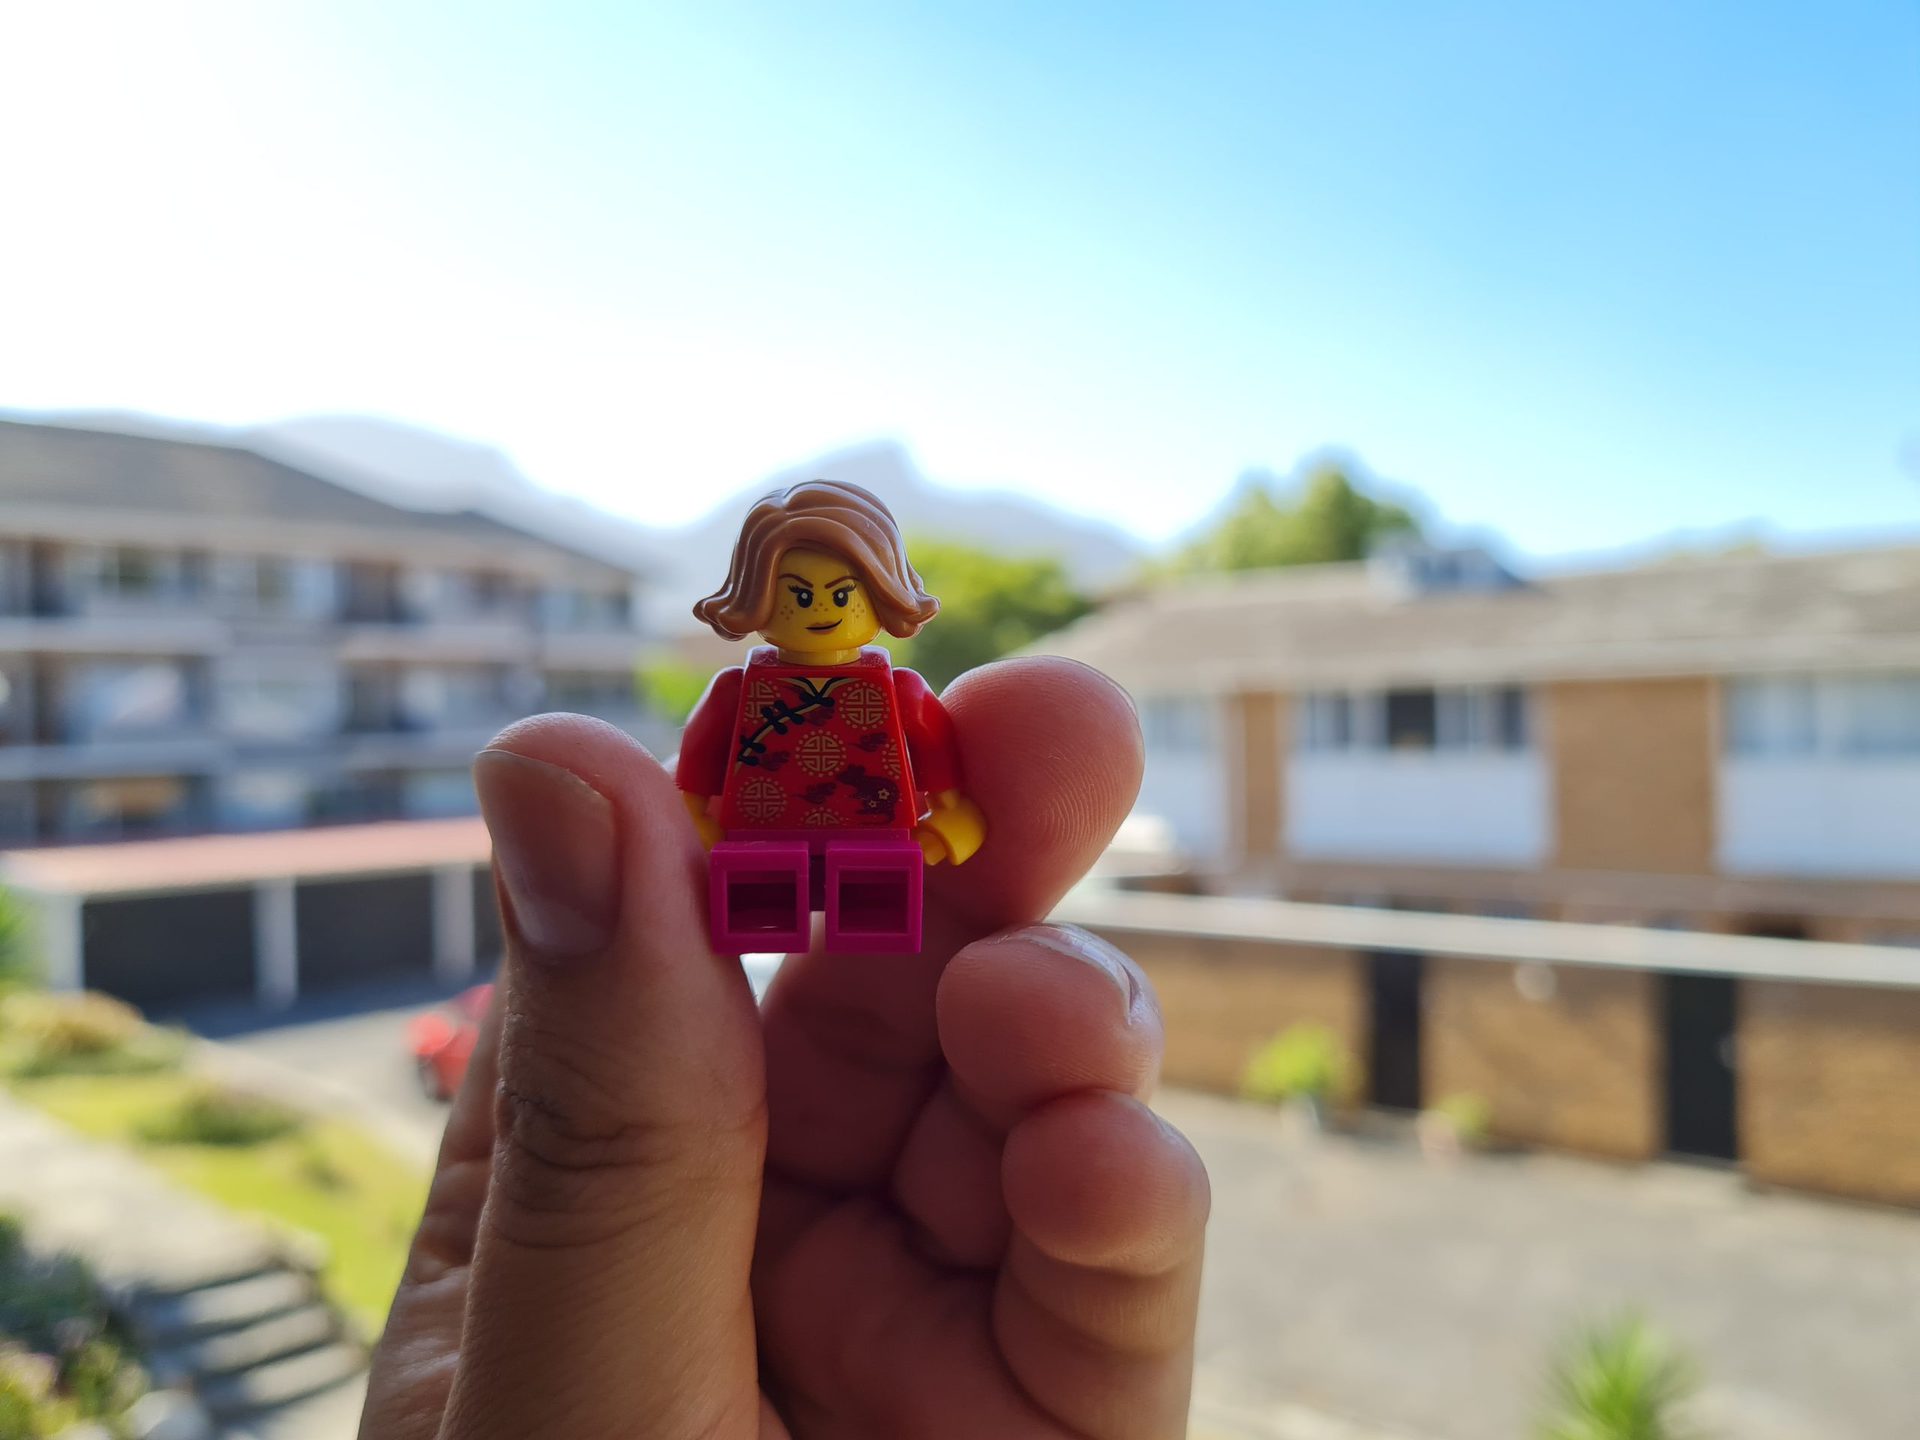 A 1X photo of a Lego model taken with the Galaxy S20 FE.